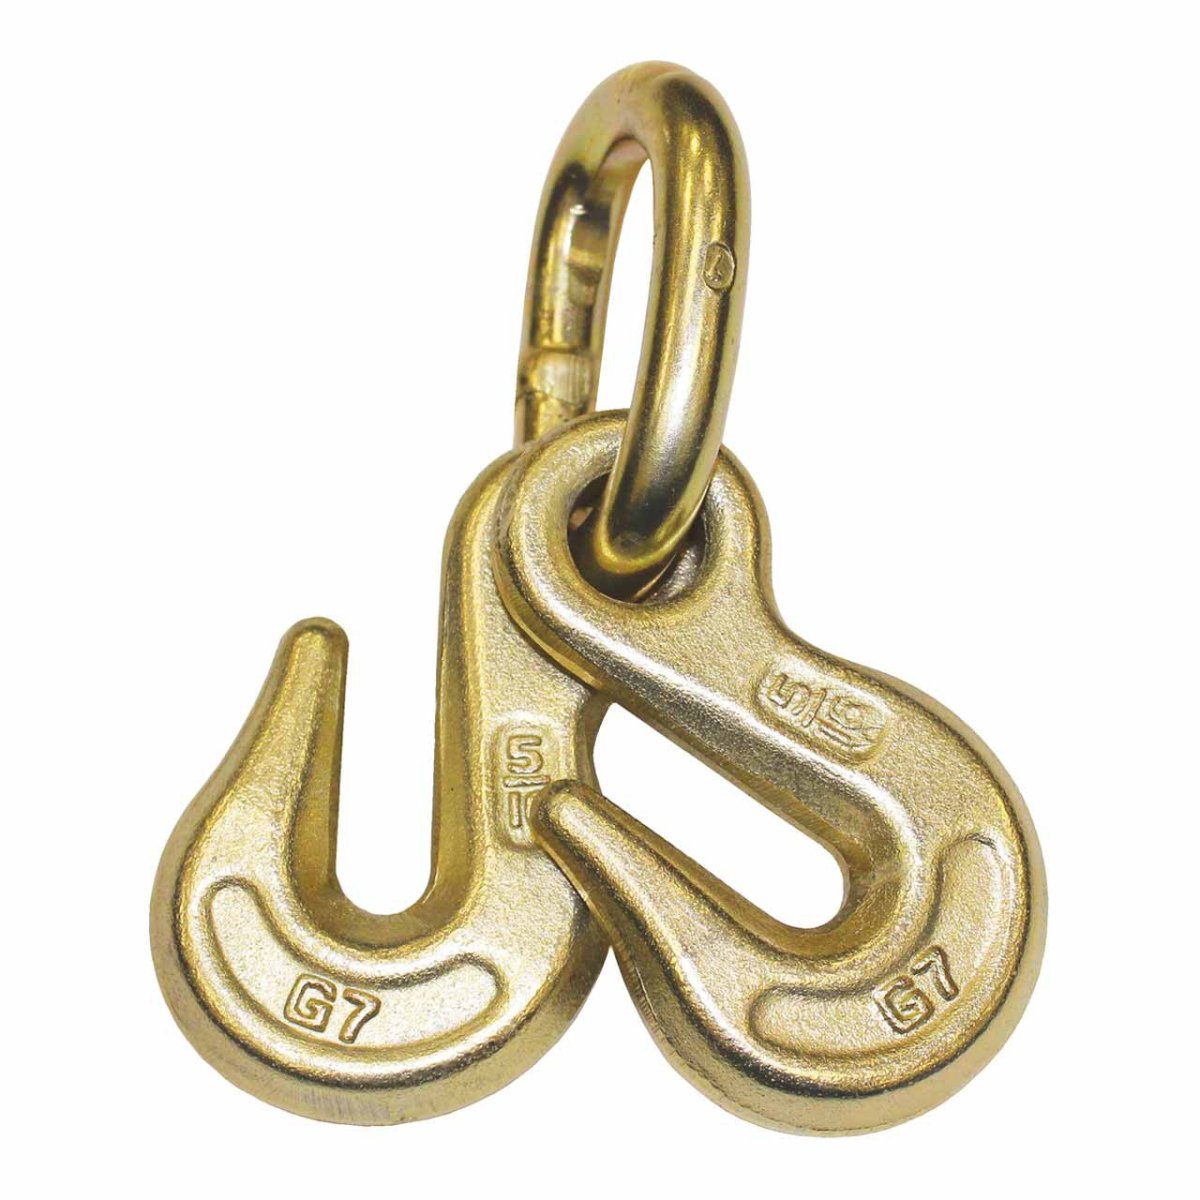 B/A Products Co. Two Grab Hooks on Link - BAP-GG - starequipmentsales